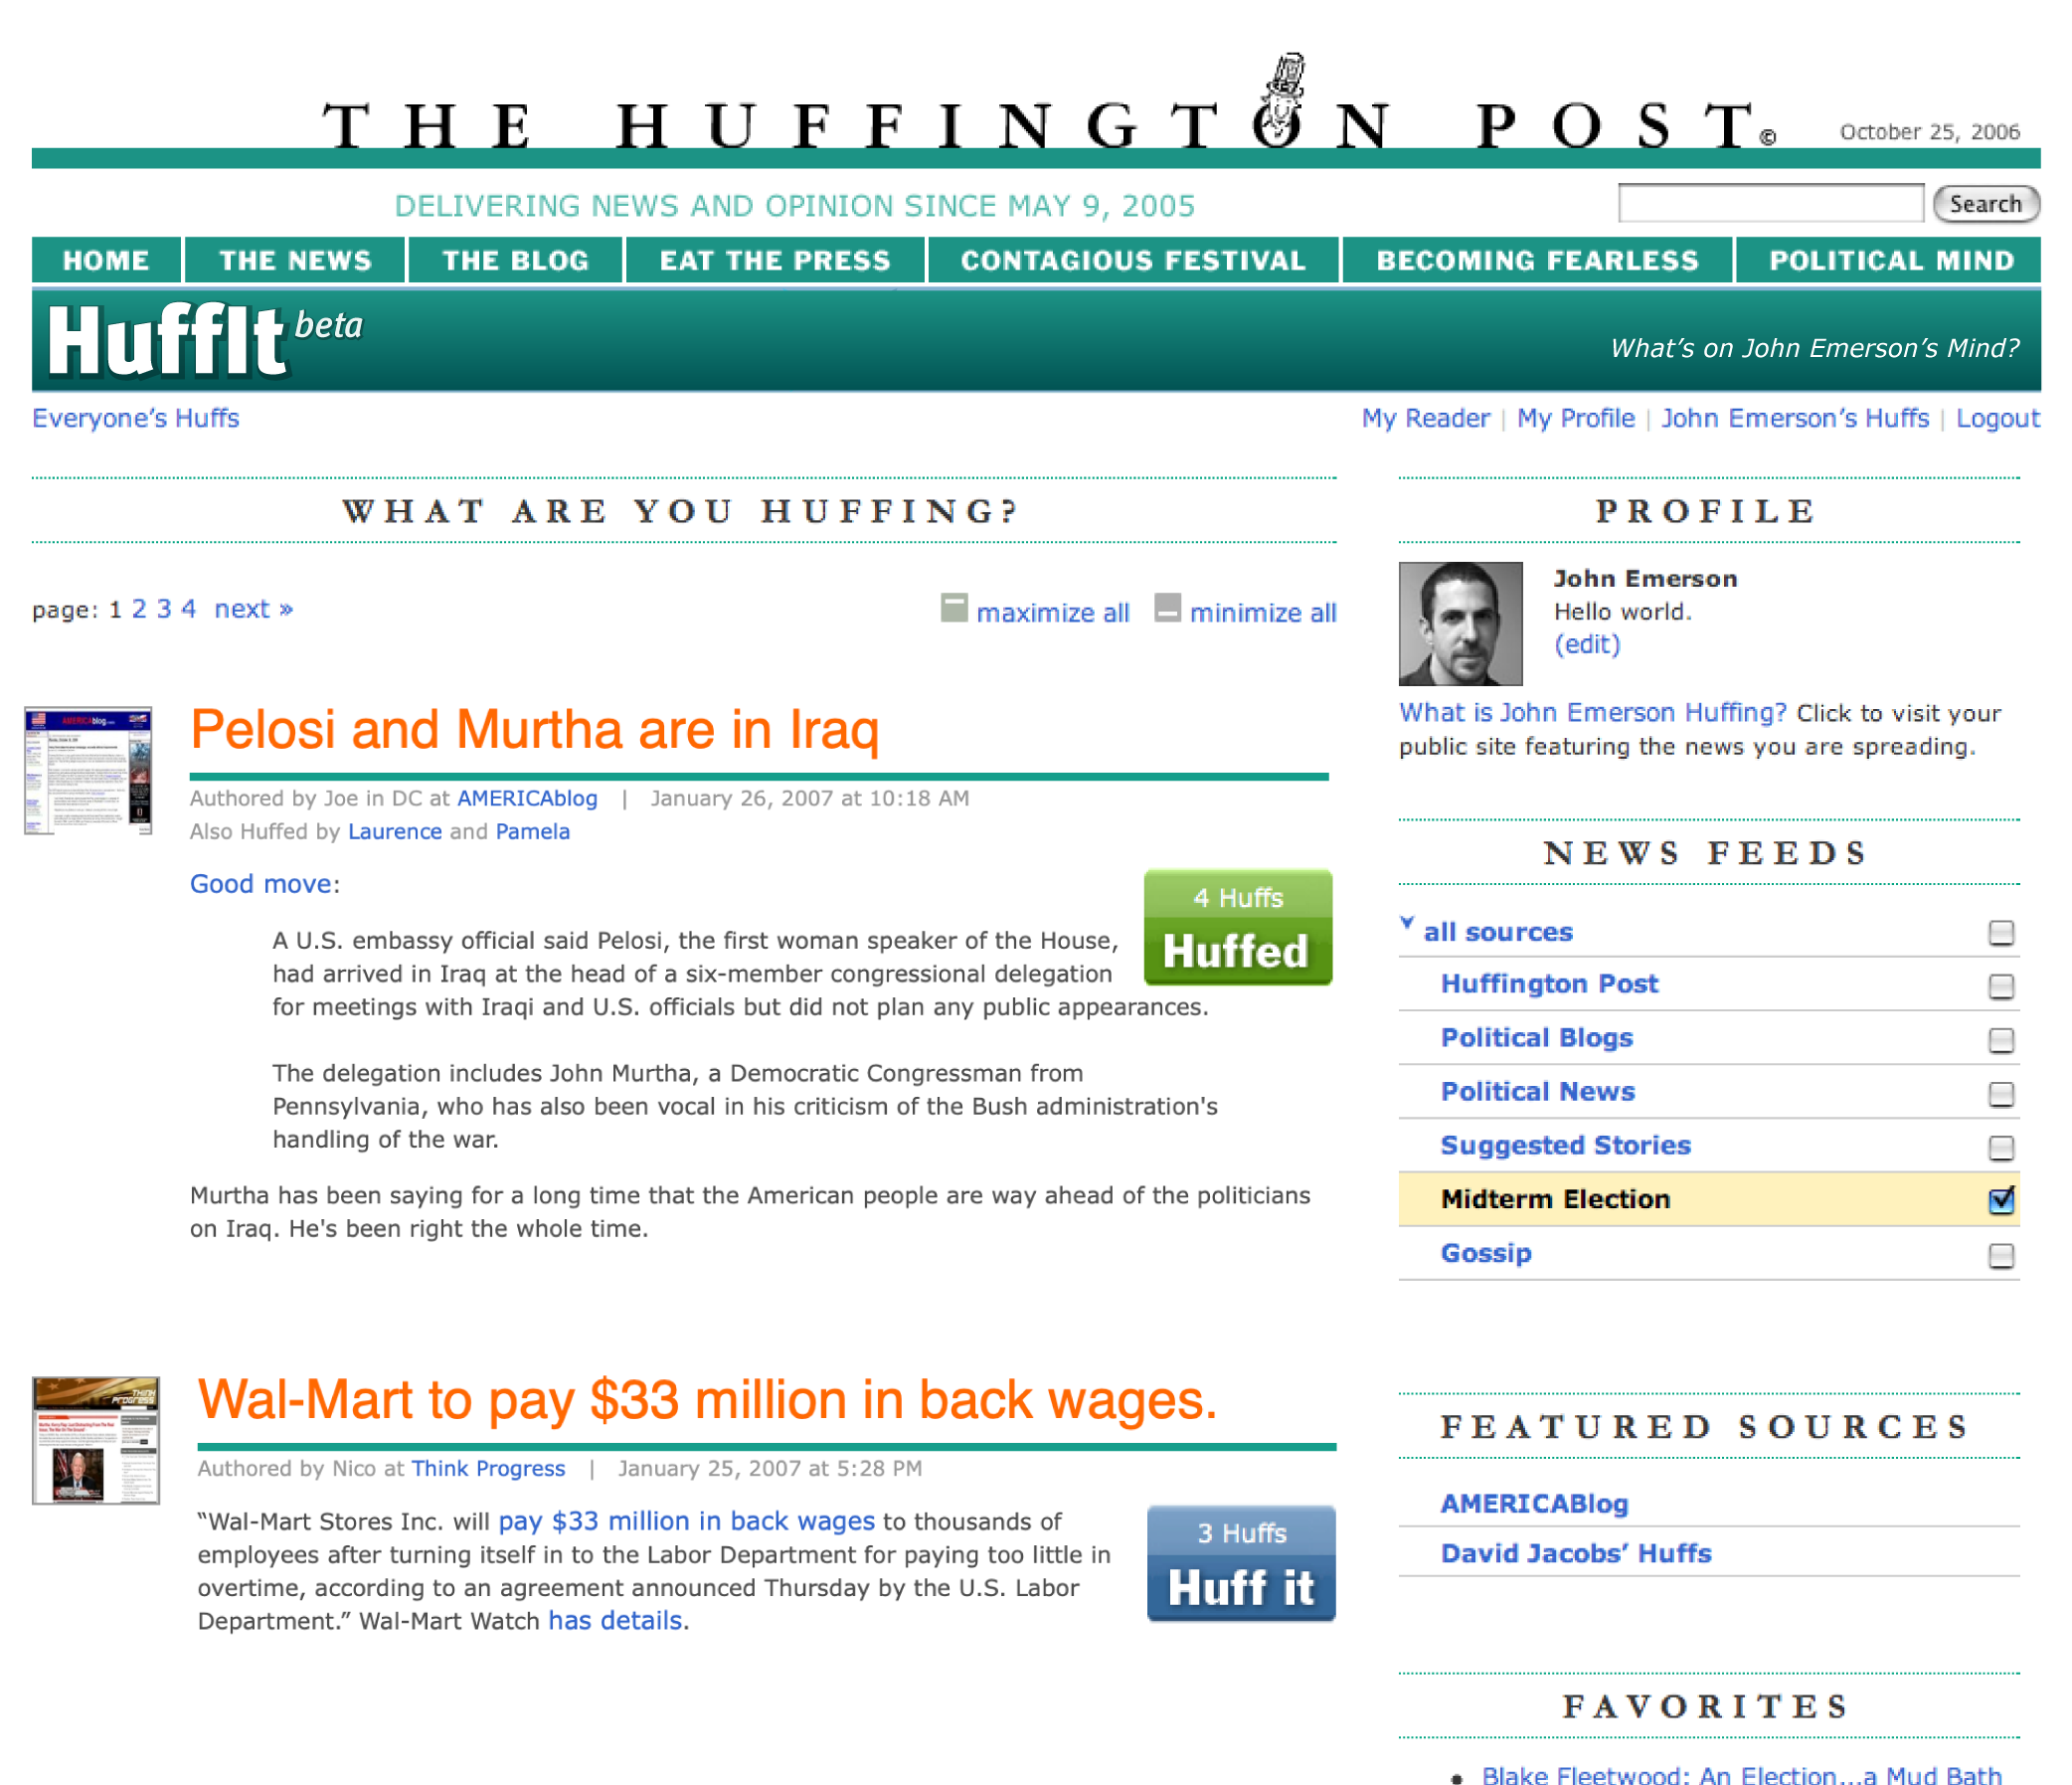 HuffIt Huffer View